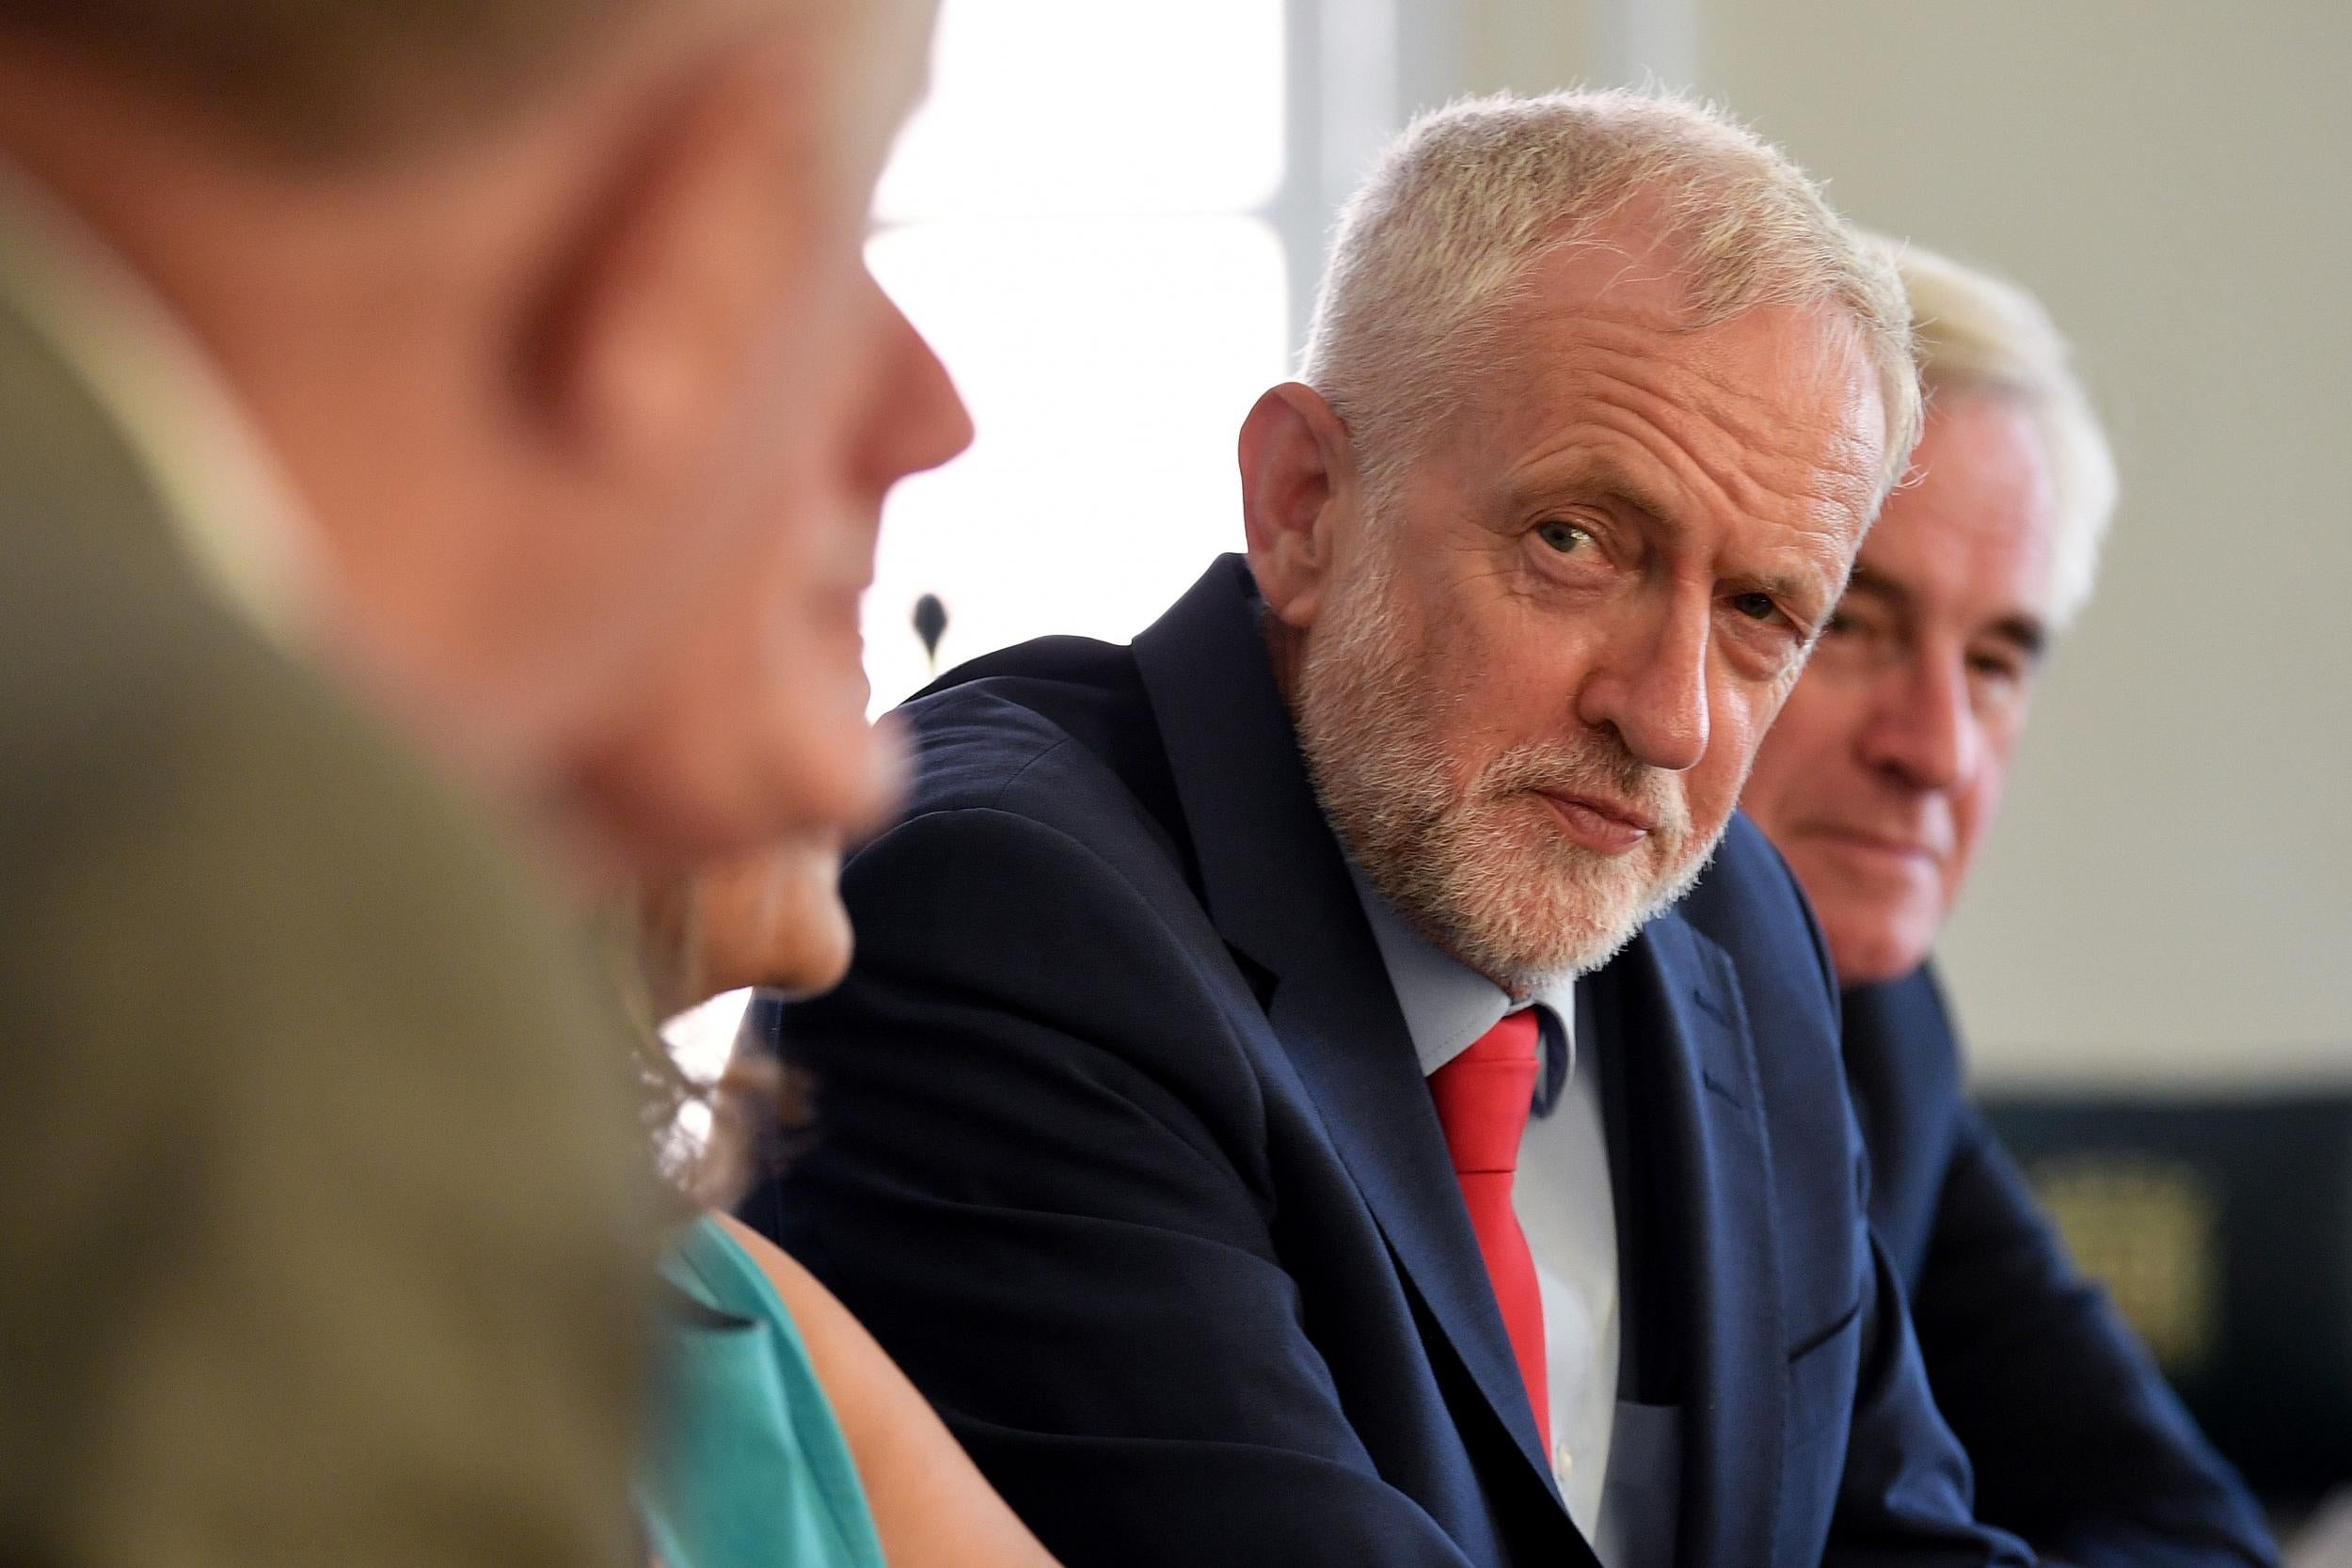 Labour's Jeremy Corbyn and other party leaders have been discussing ways to stop a no-deal Brexit